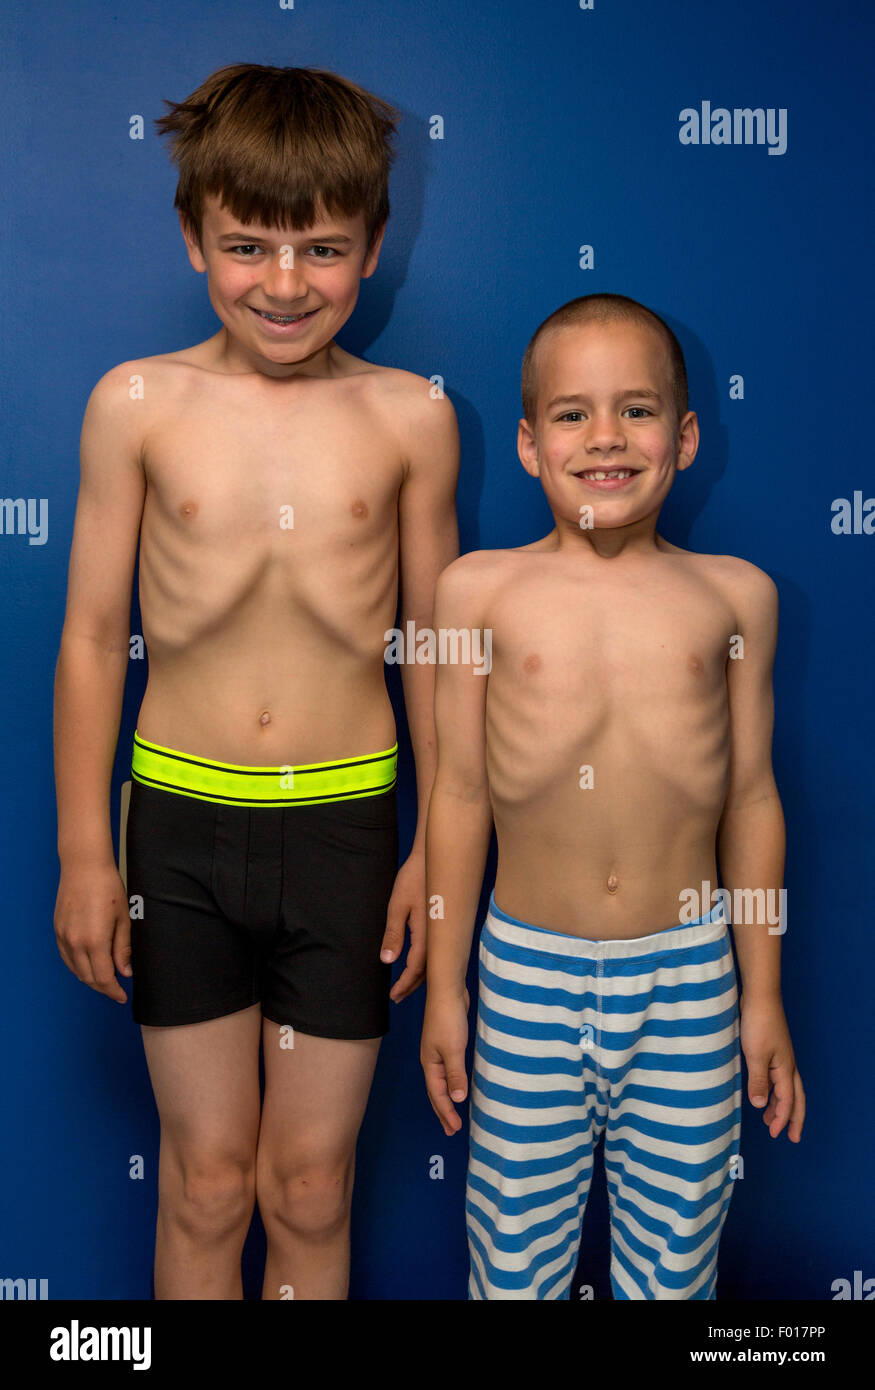 Young Boys (Ages 9 and 7) Showing off their Rib Cages for Fun.  MR Stock Photo